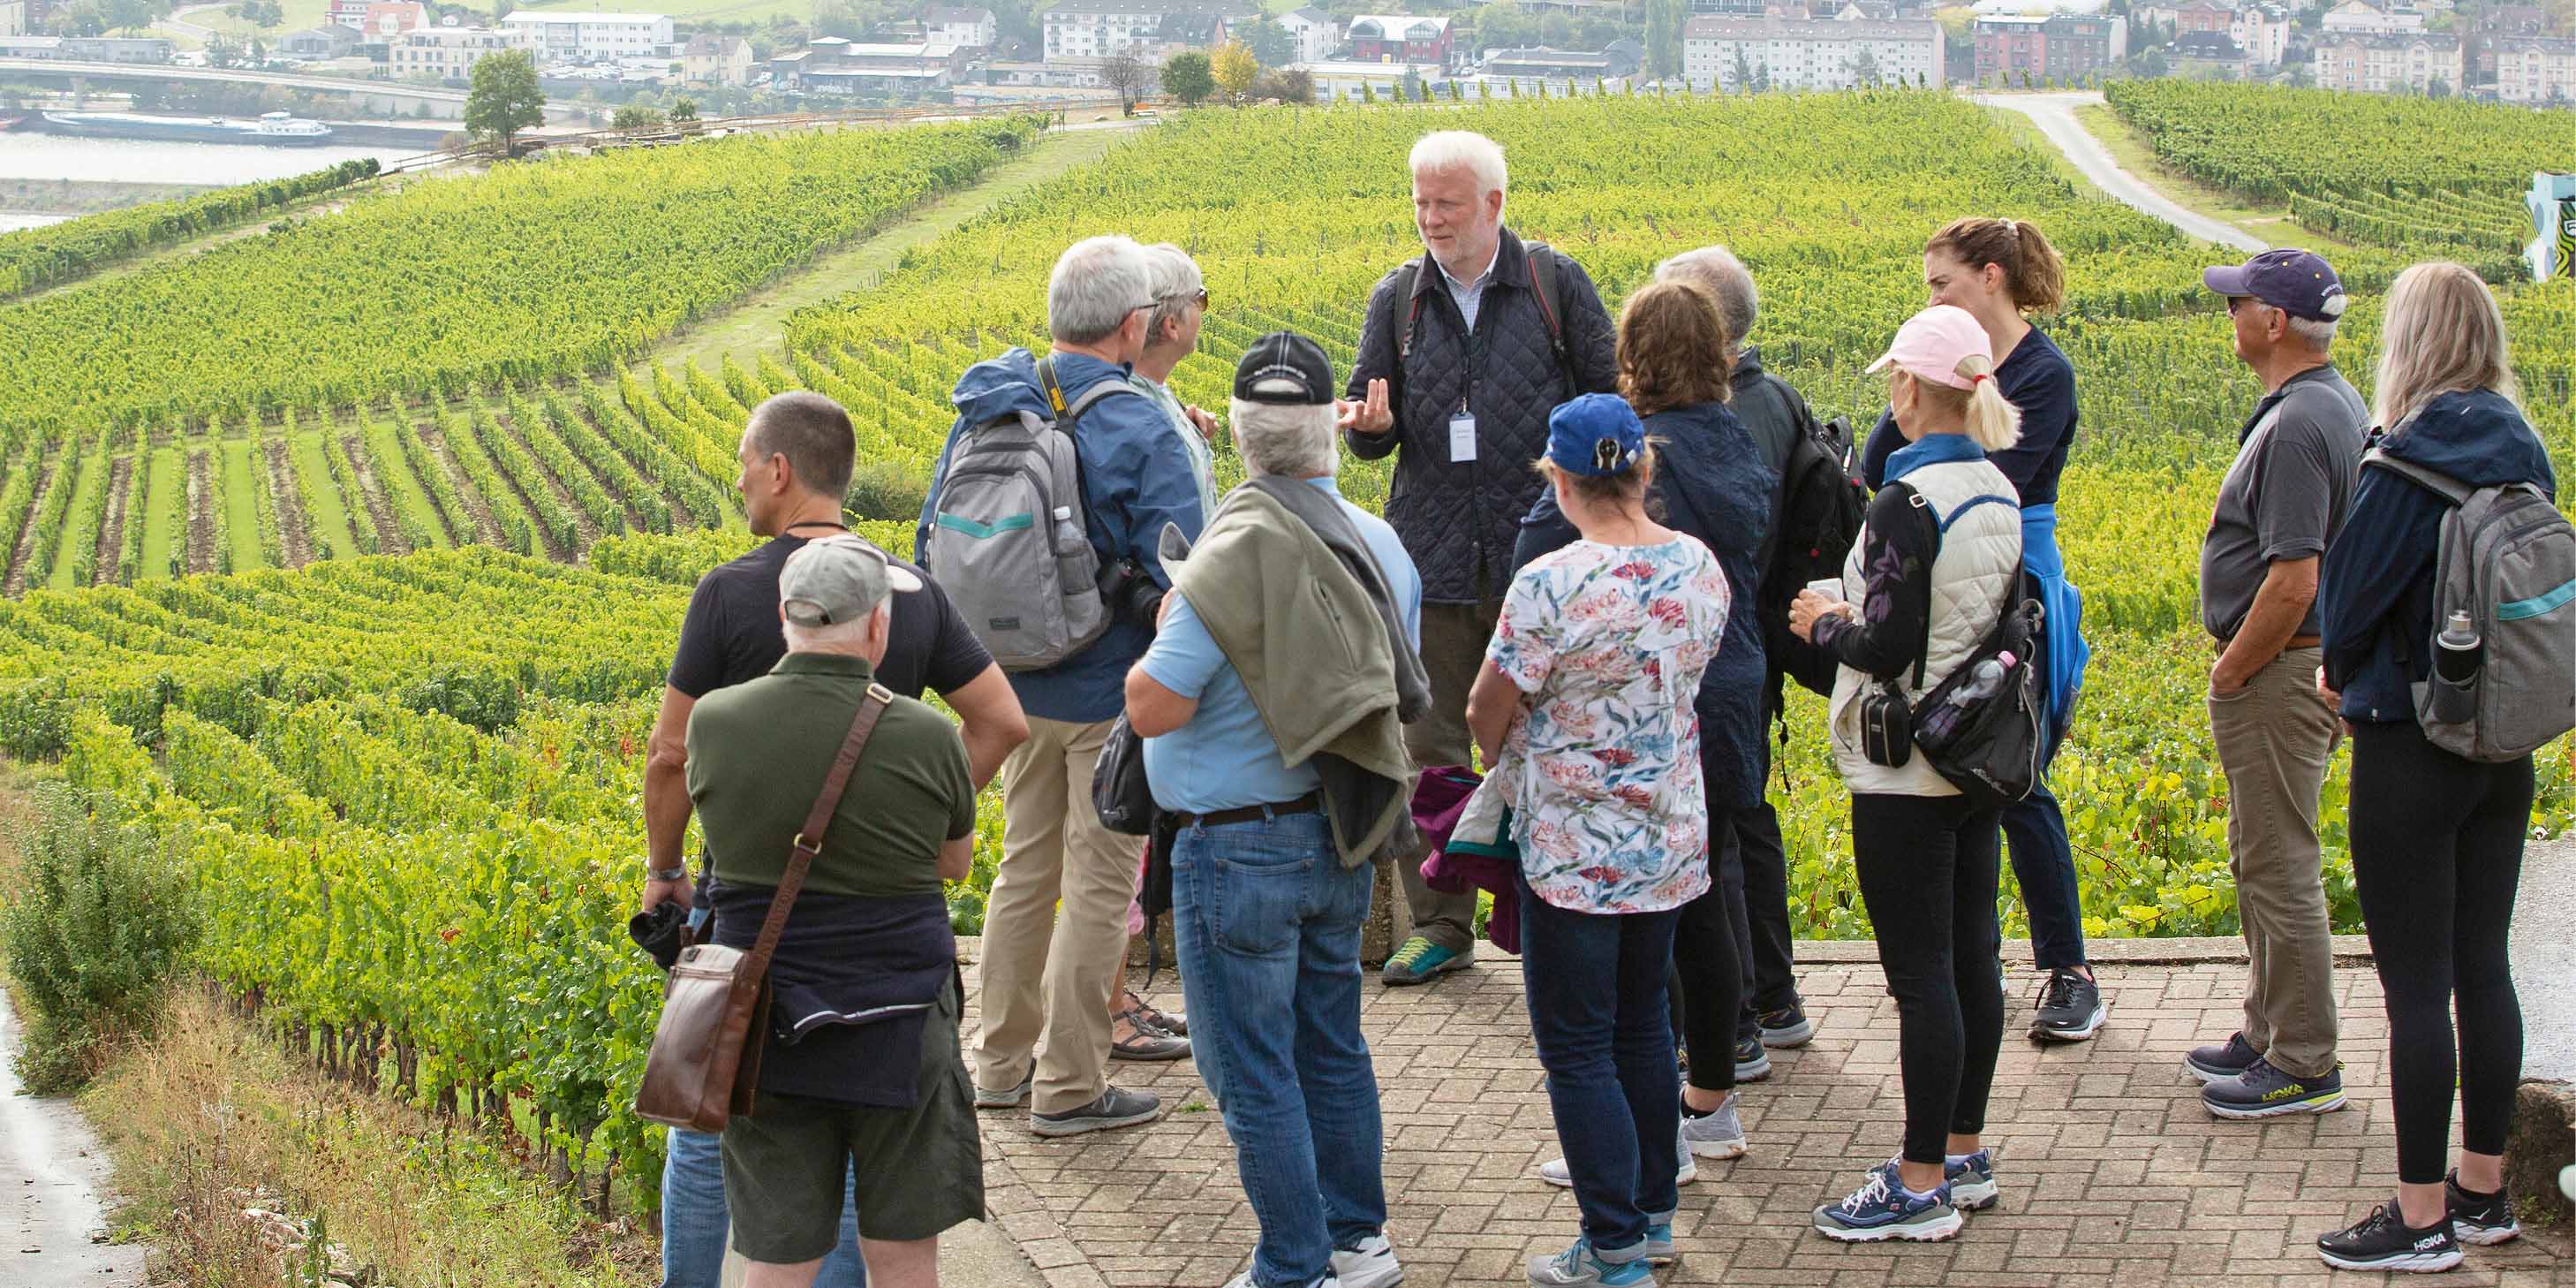 A guided tour of the Niederwalddenkmal vineyards, with green fields full of grapes, and the neighbouring town visible in the distance